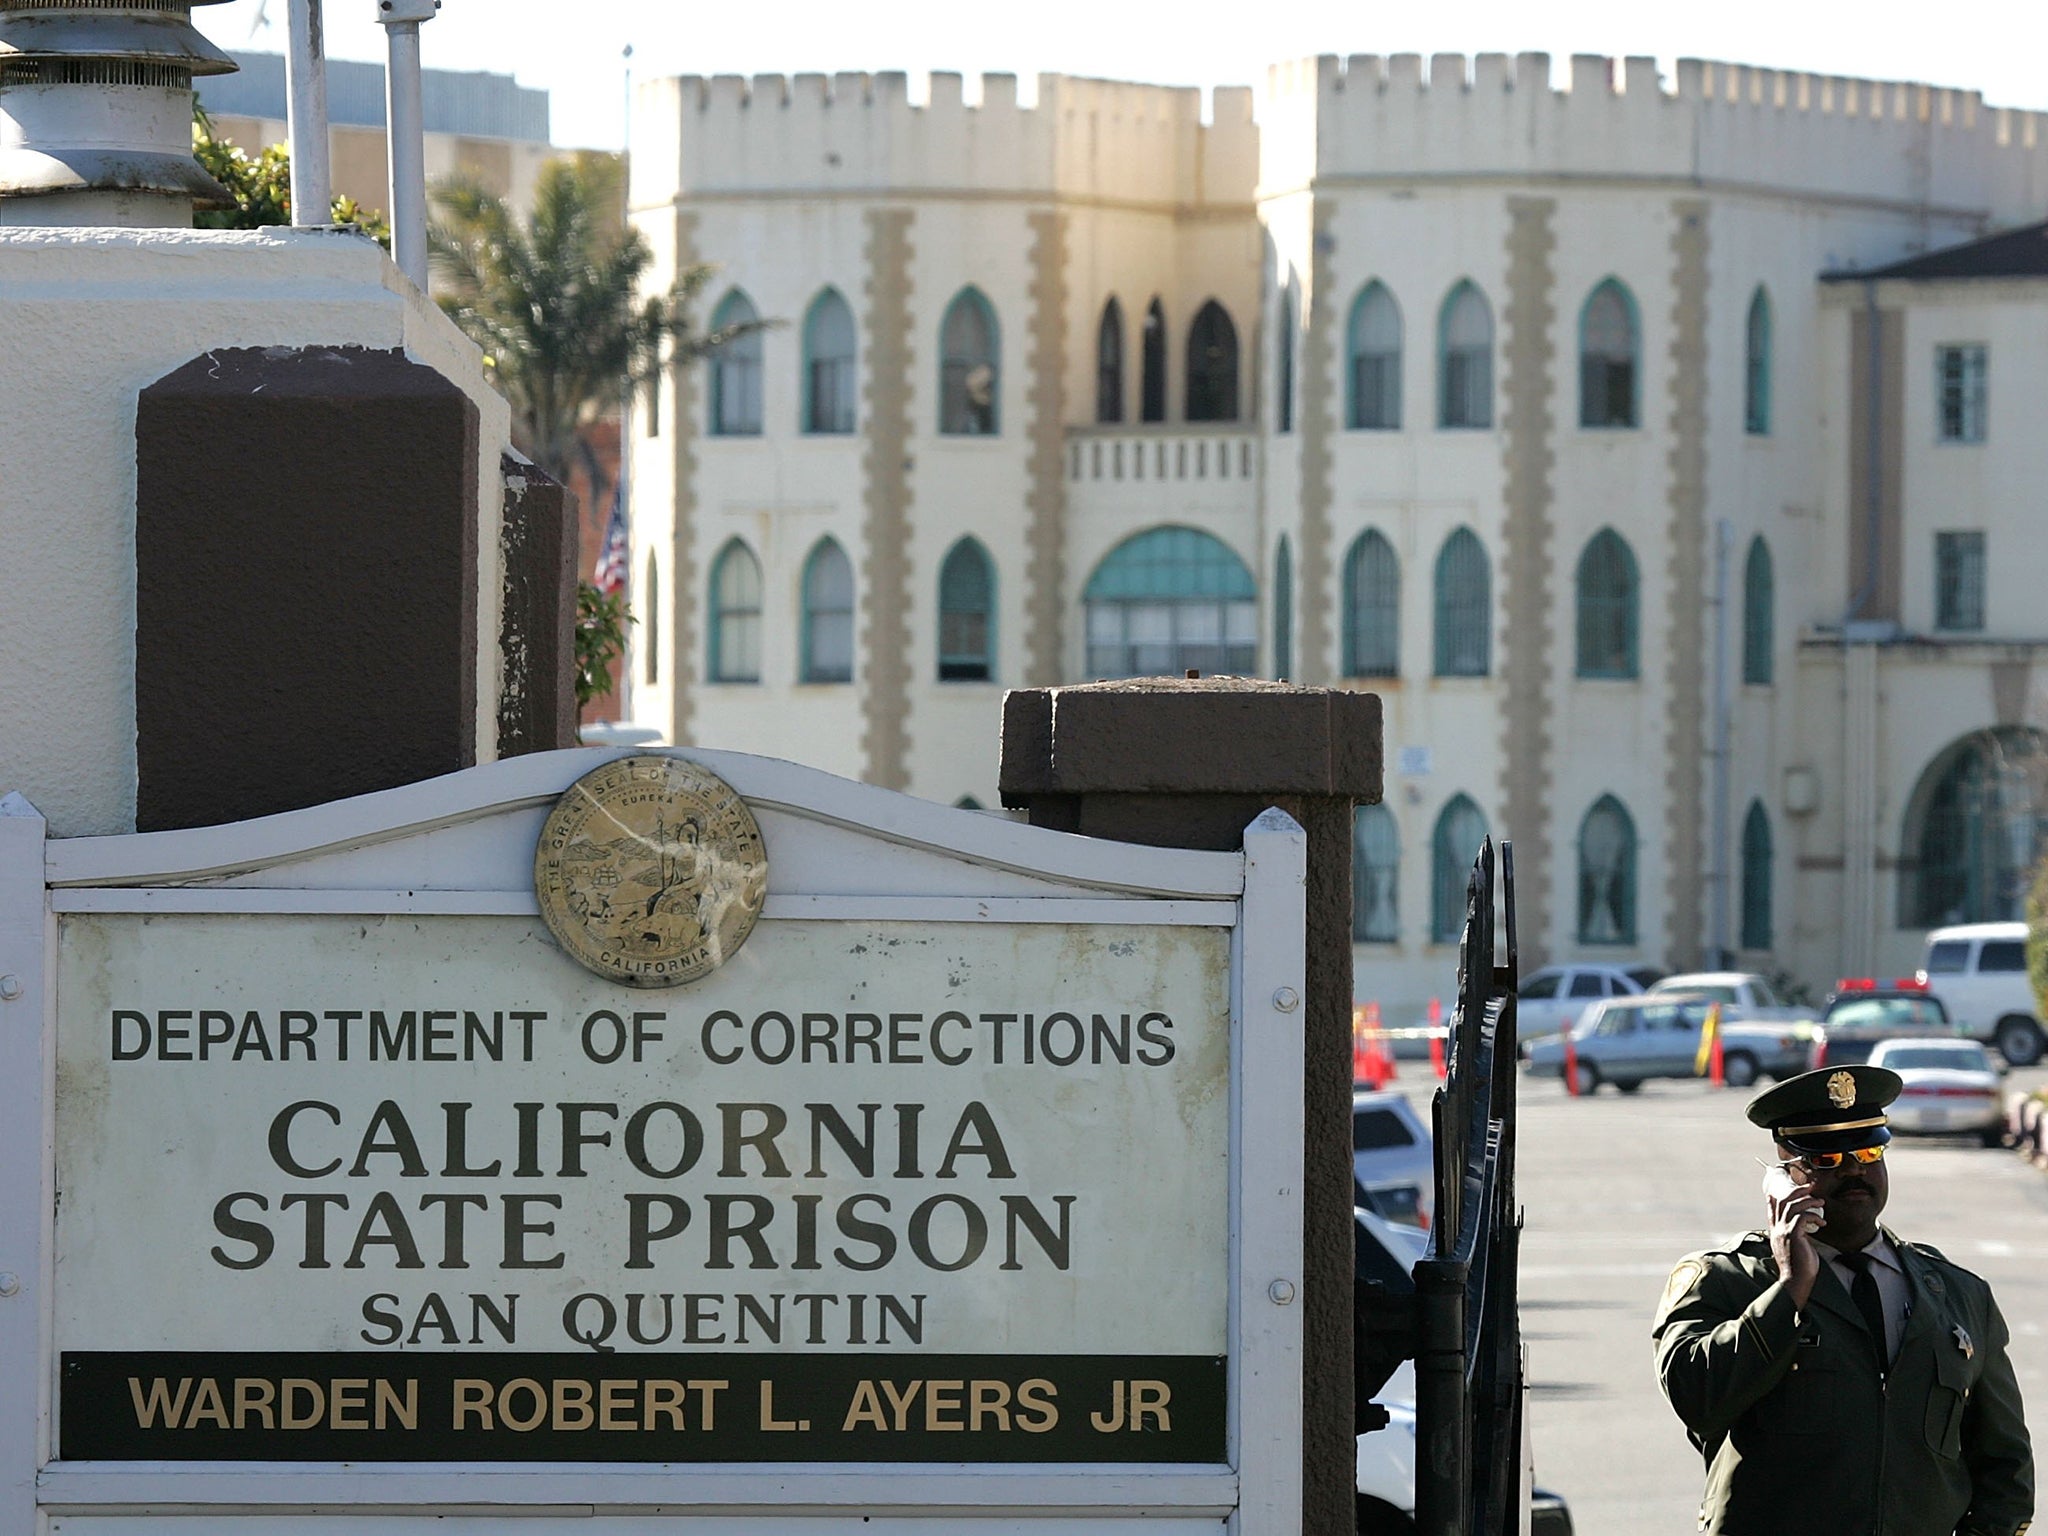 Since 1978, California has sentenced more than 900 people to death, but executed just 13 (Justin Sullivan / Getty Images News)